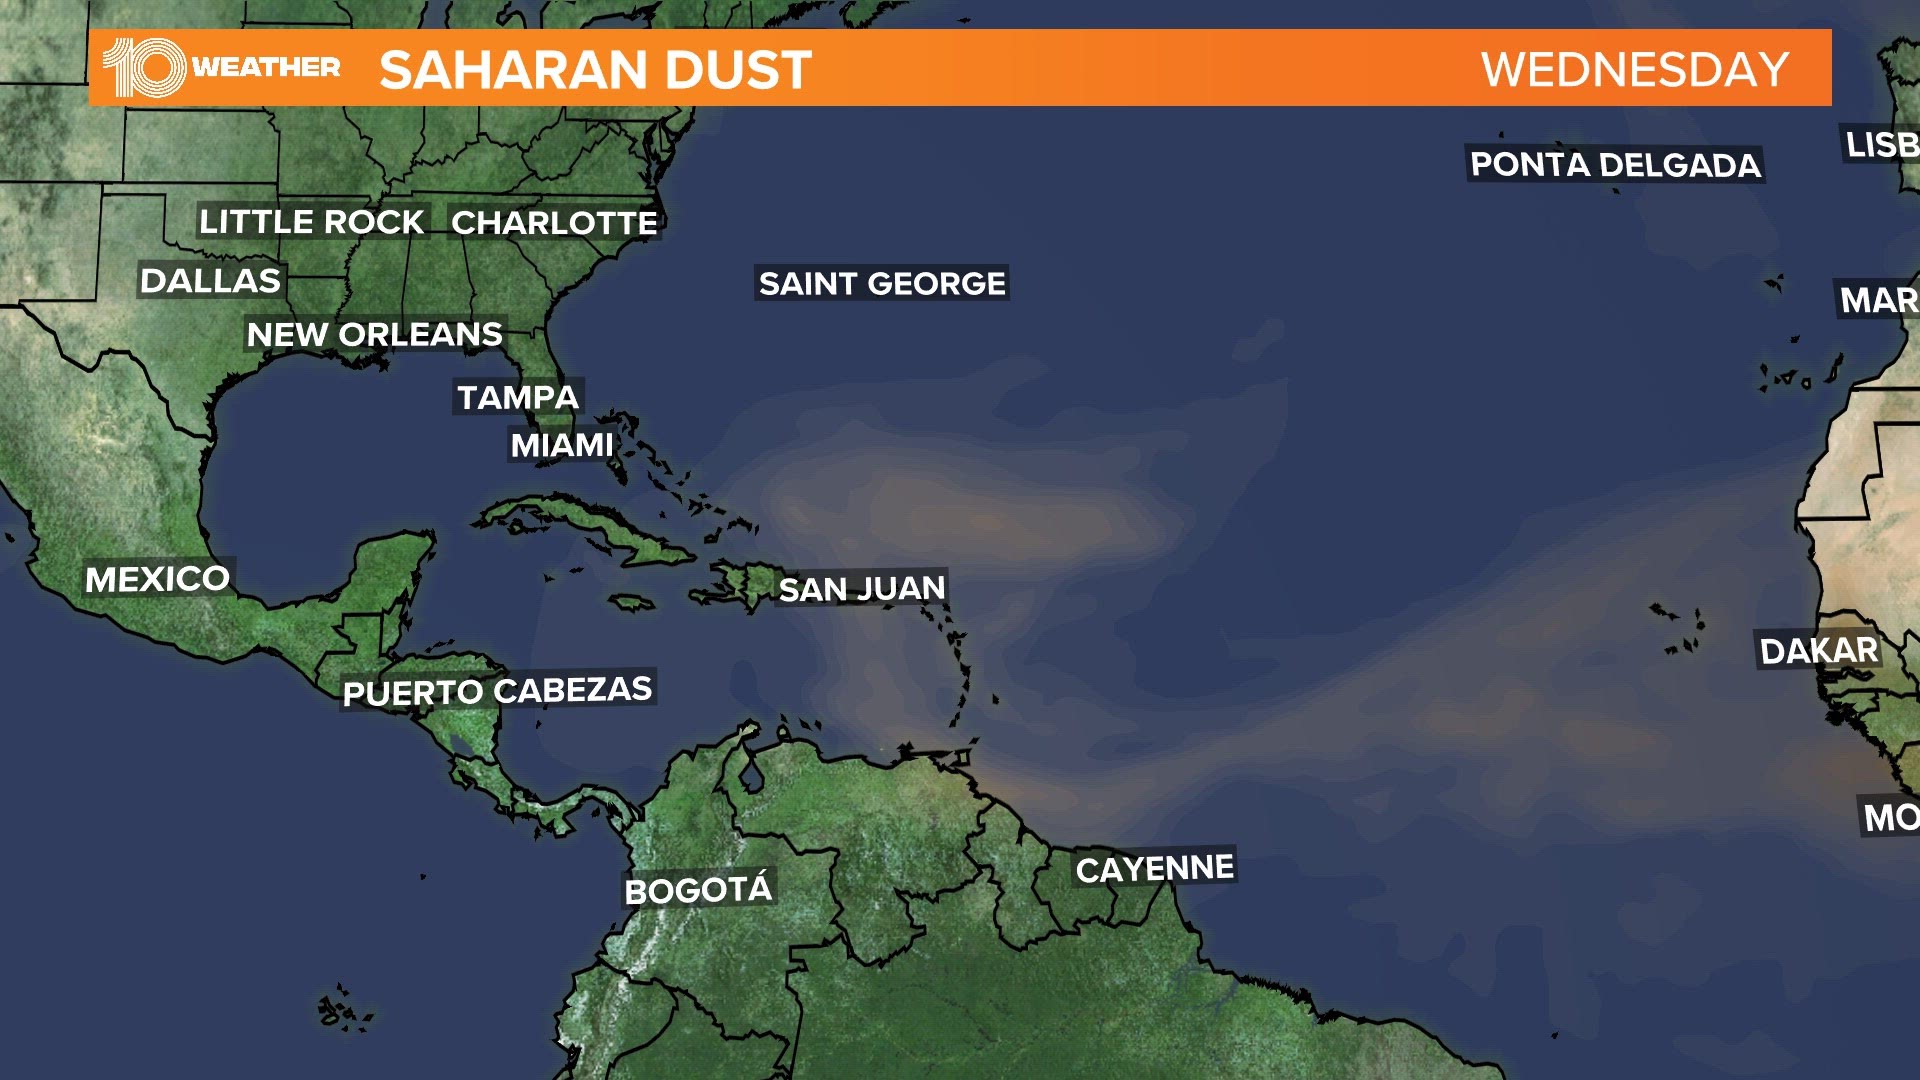 Drier air and Saharan dust is expected to gradually move over Puerto Rico throughout the next few days.